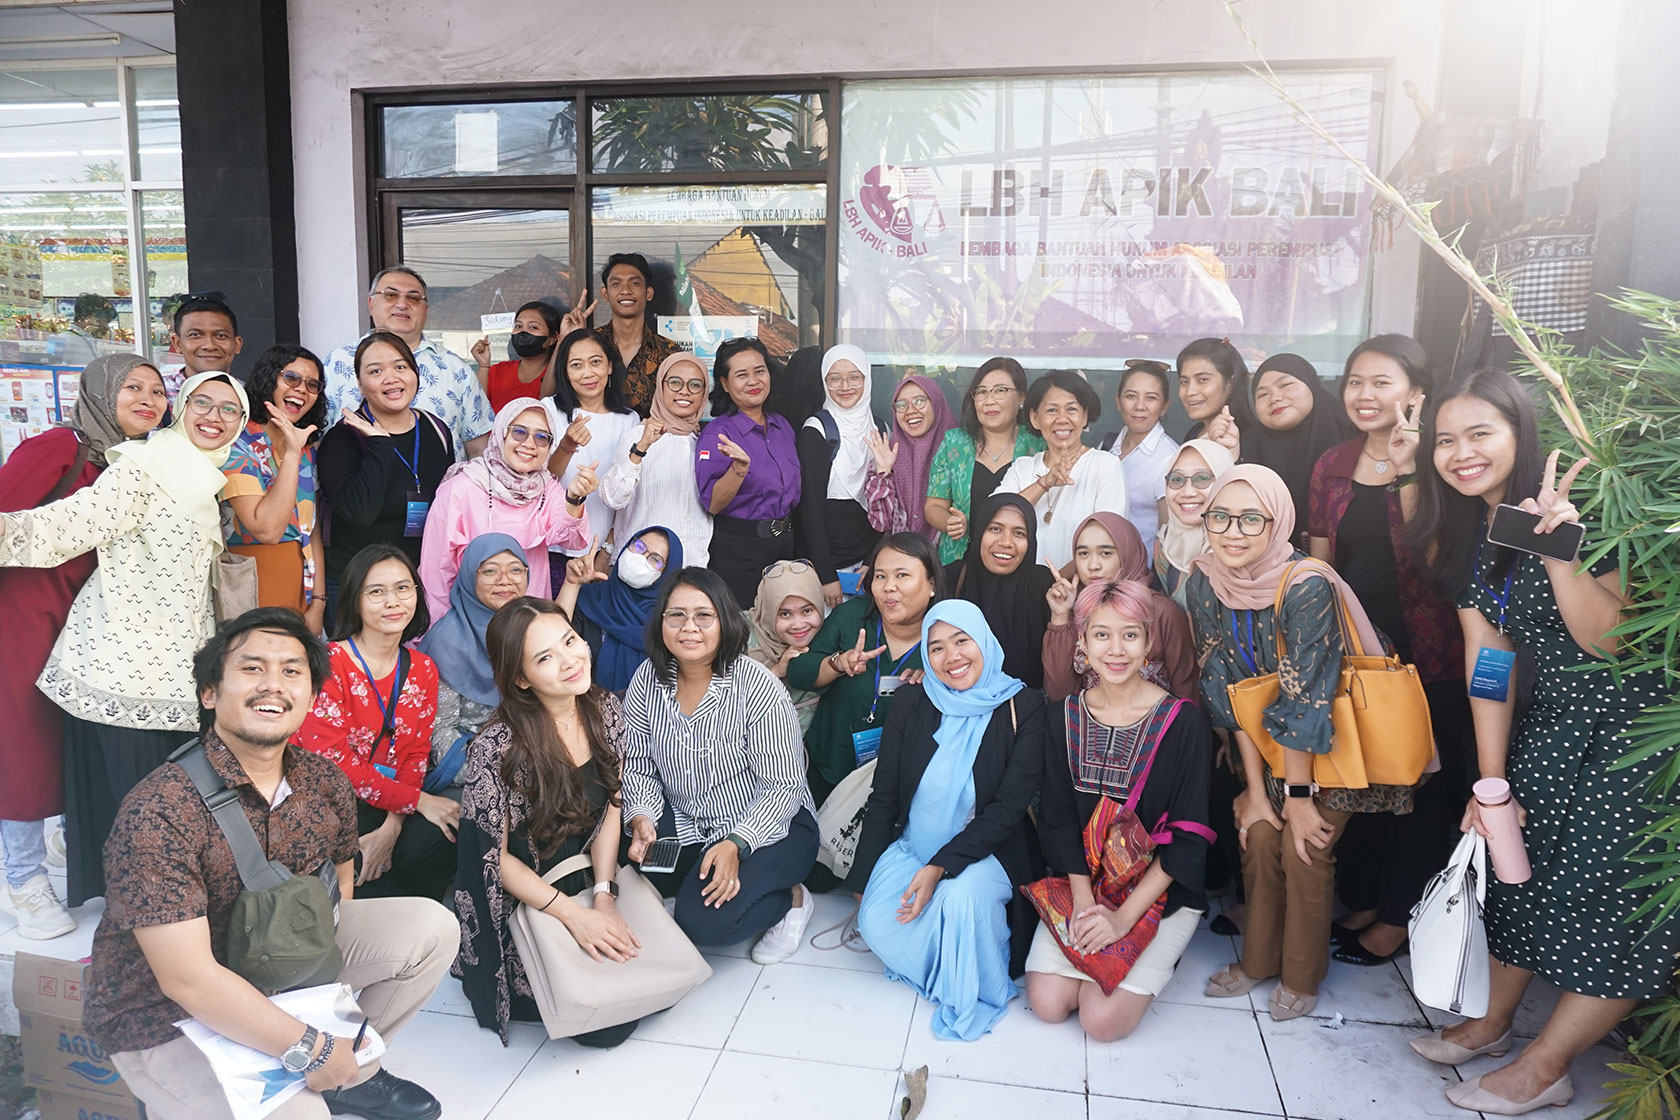 The participants visit the Women’s Legal Aid Organisation Association for Justice (LBH Apik) office in Bali.